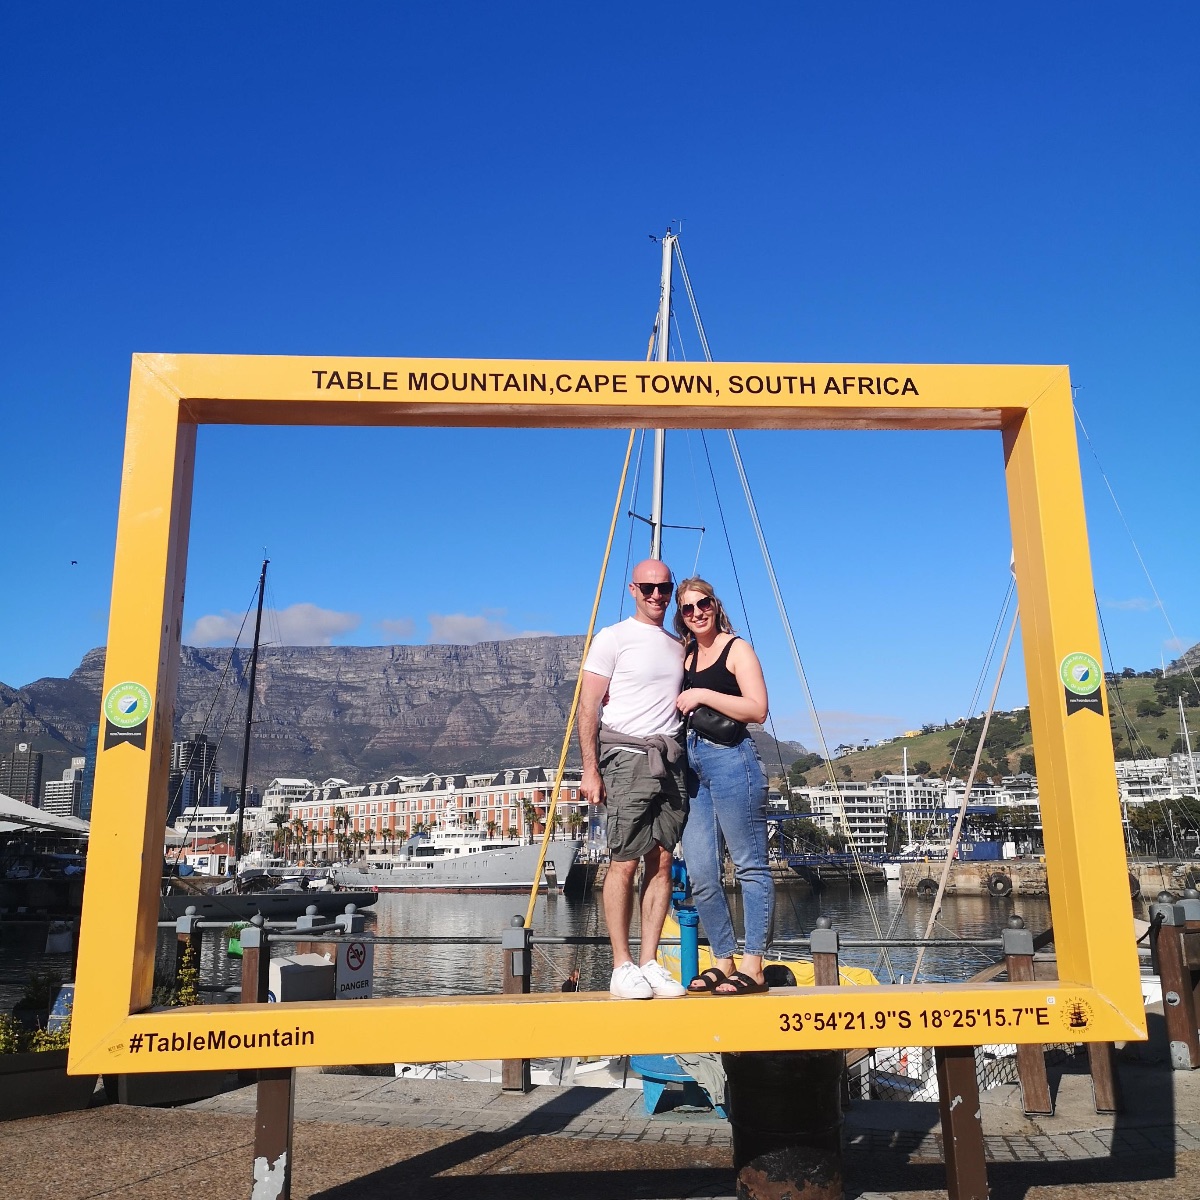 Client travels South Africa